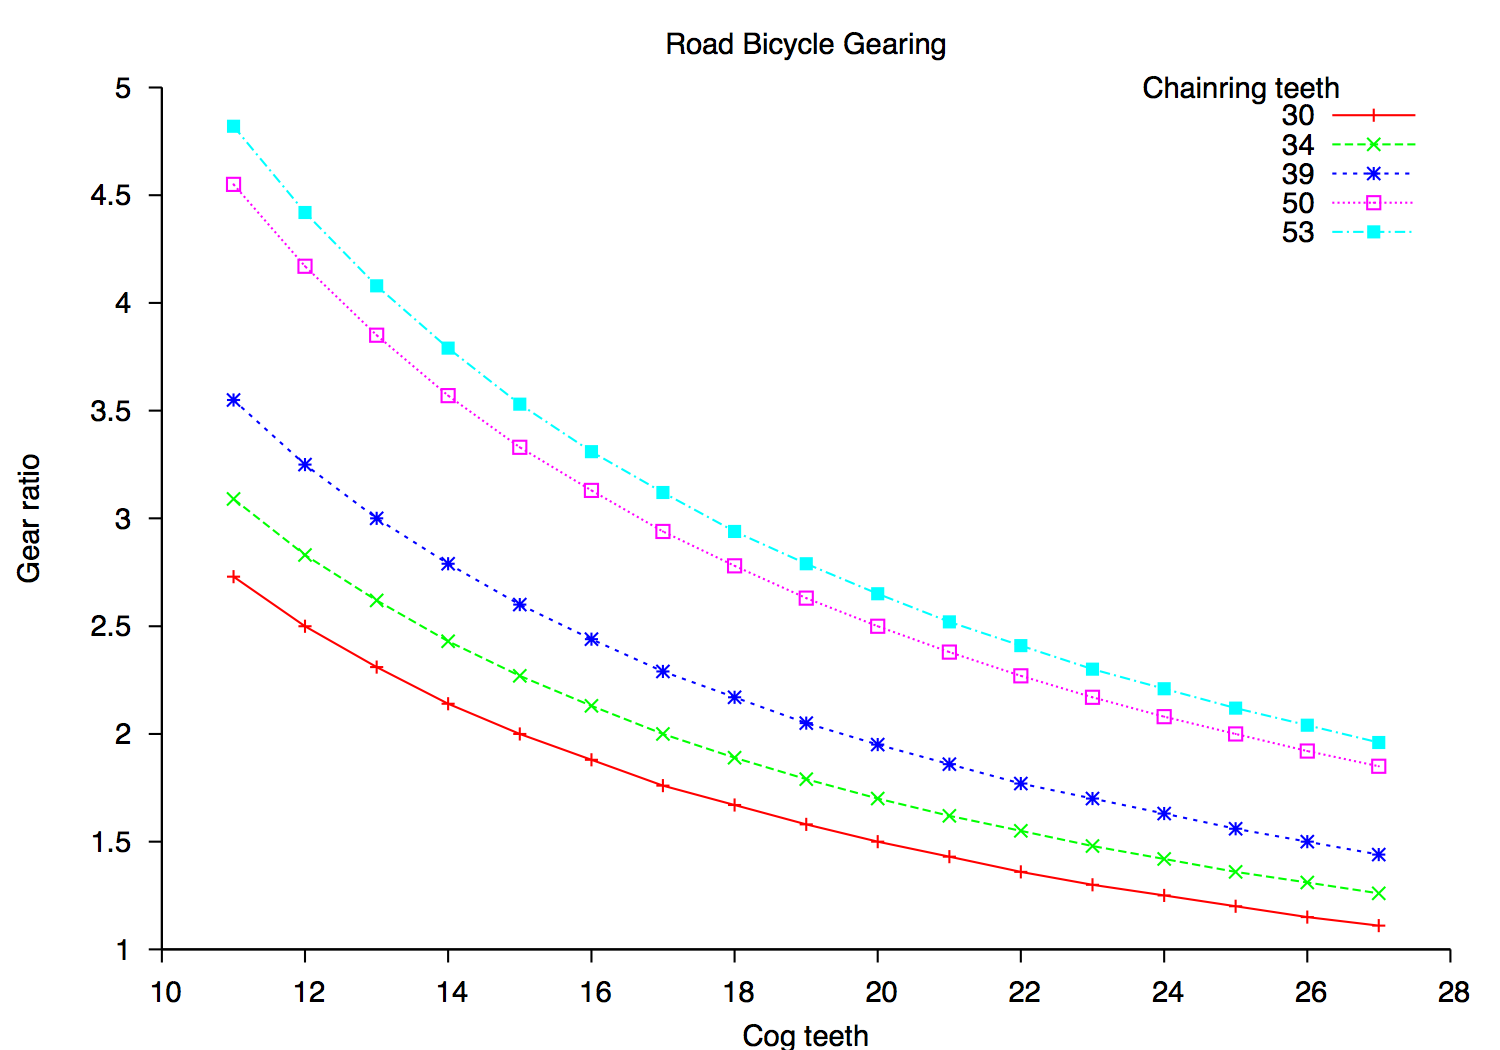 Graph showing gear ratio for various cycling gear options